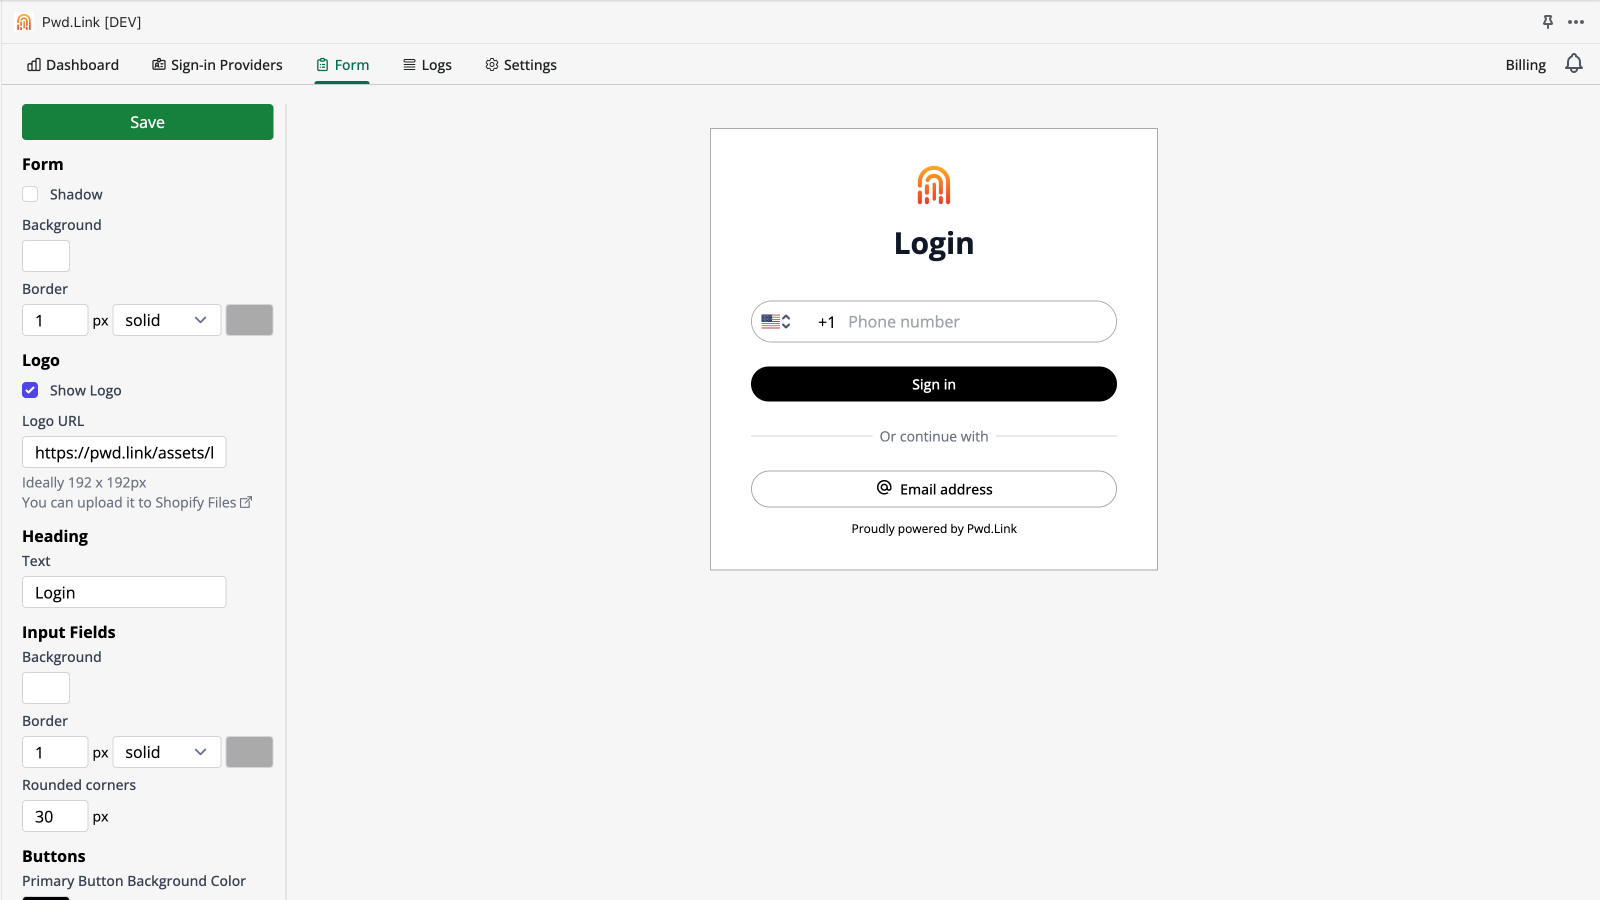 You can customize the design of the login form